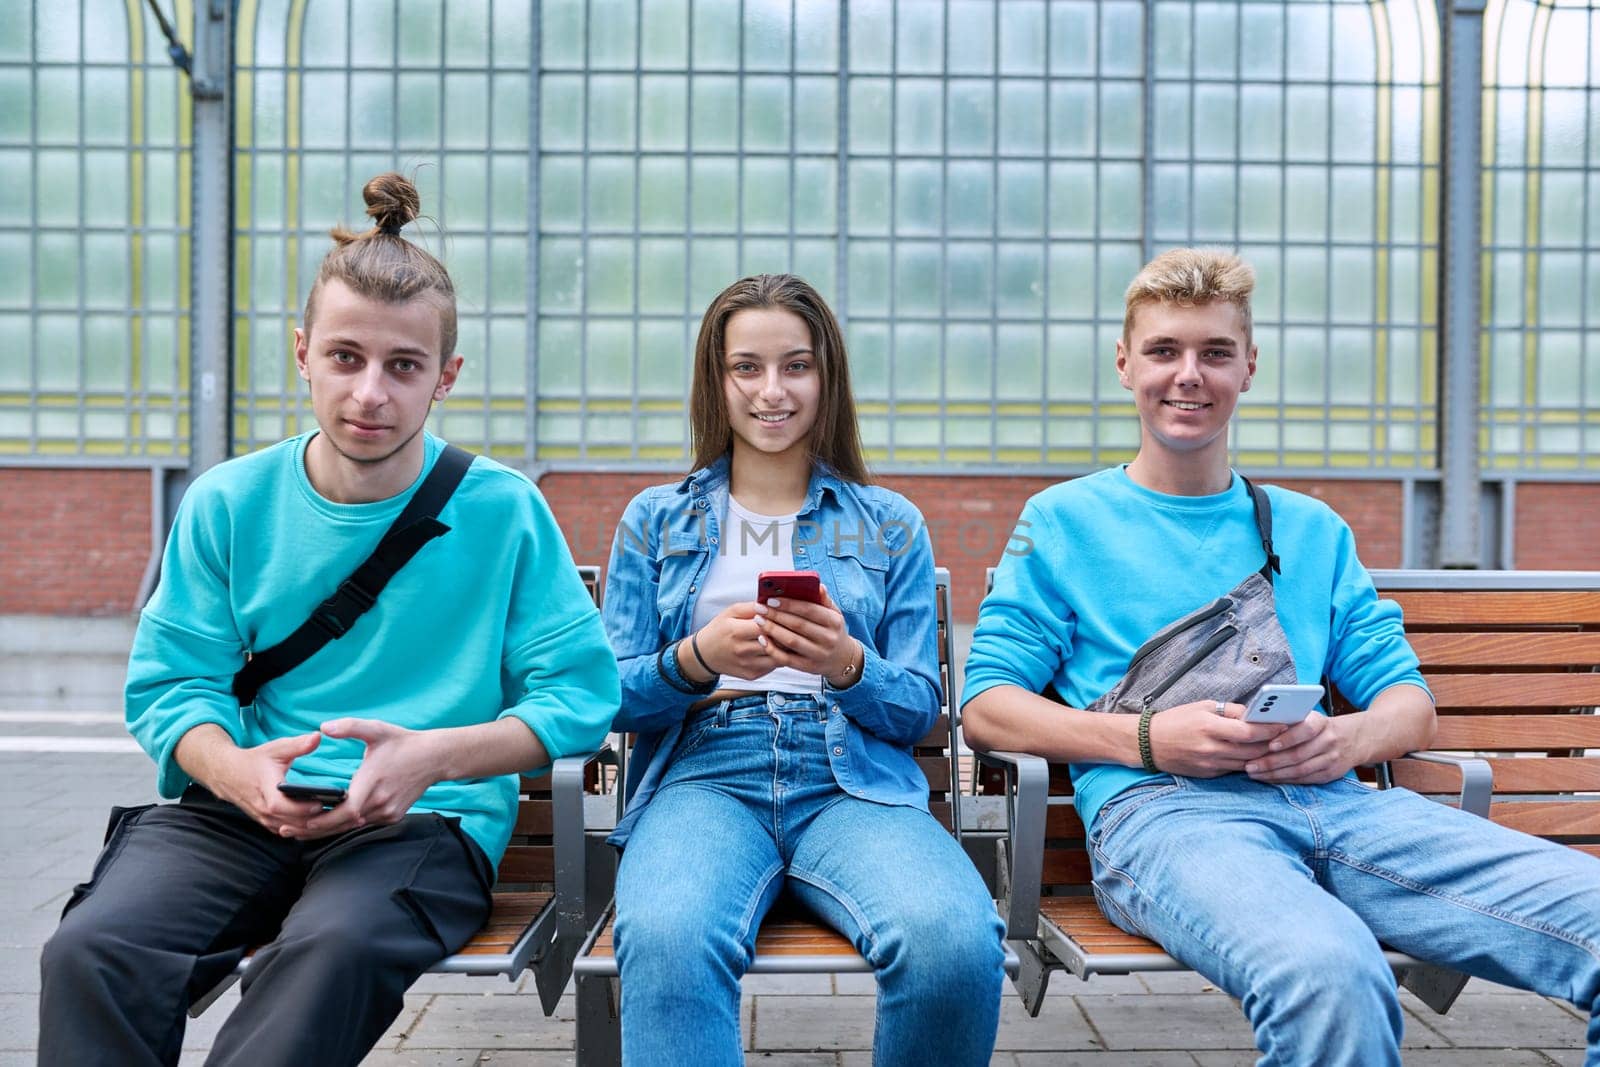 Group of teenage friends using smartphones sitting on chairs on train station platform, looking at camera. Youth, adolescence, digital technology, mobile applications, communication learning networks